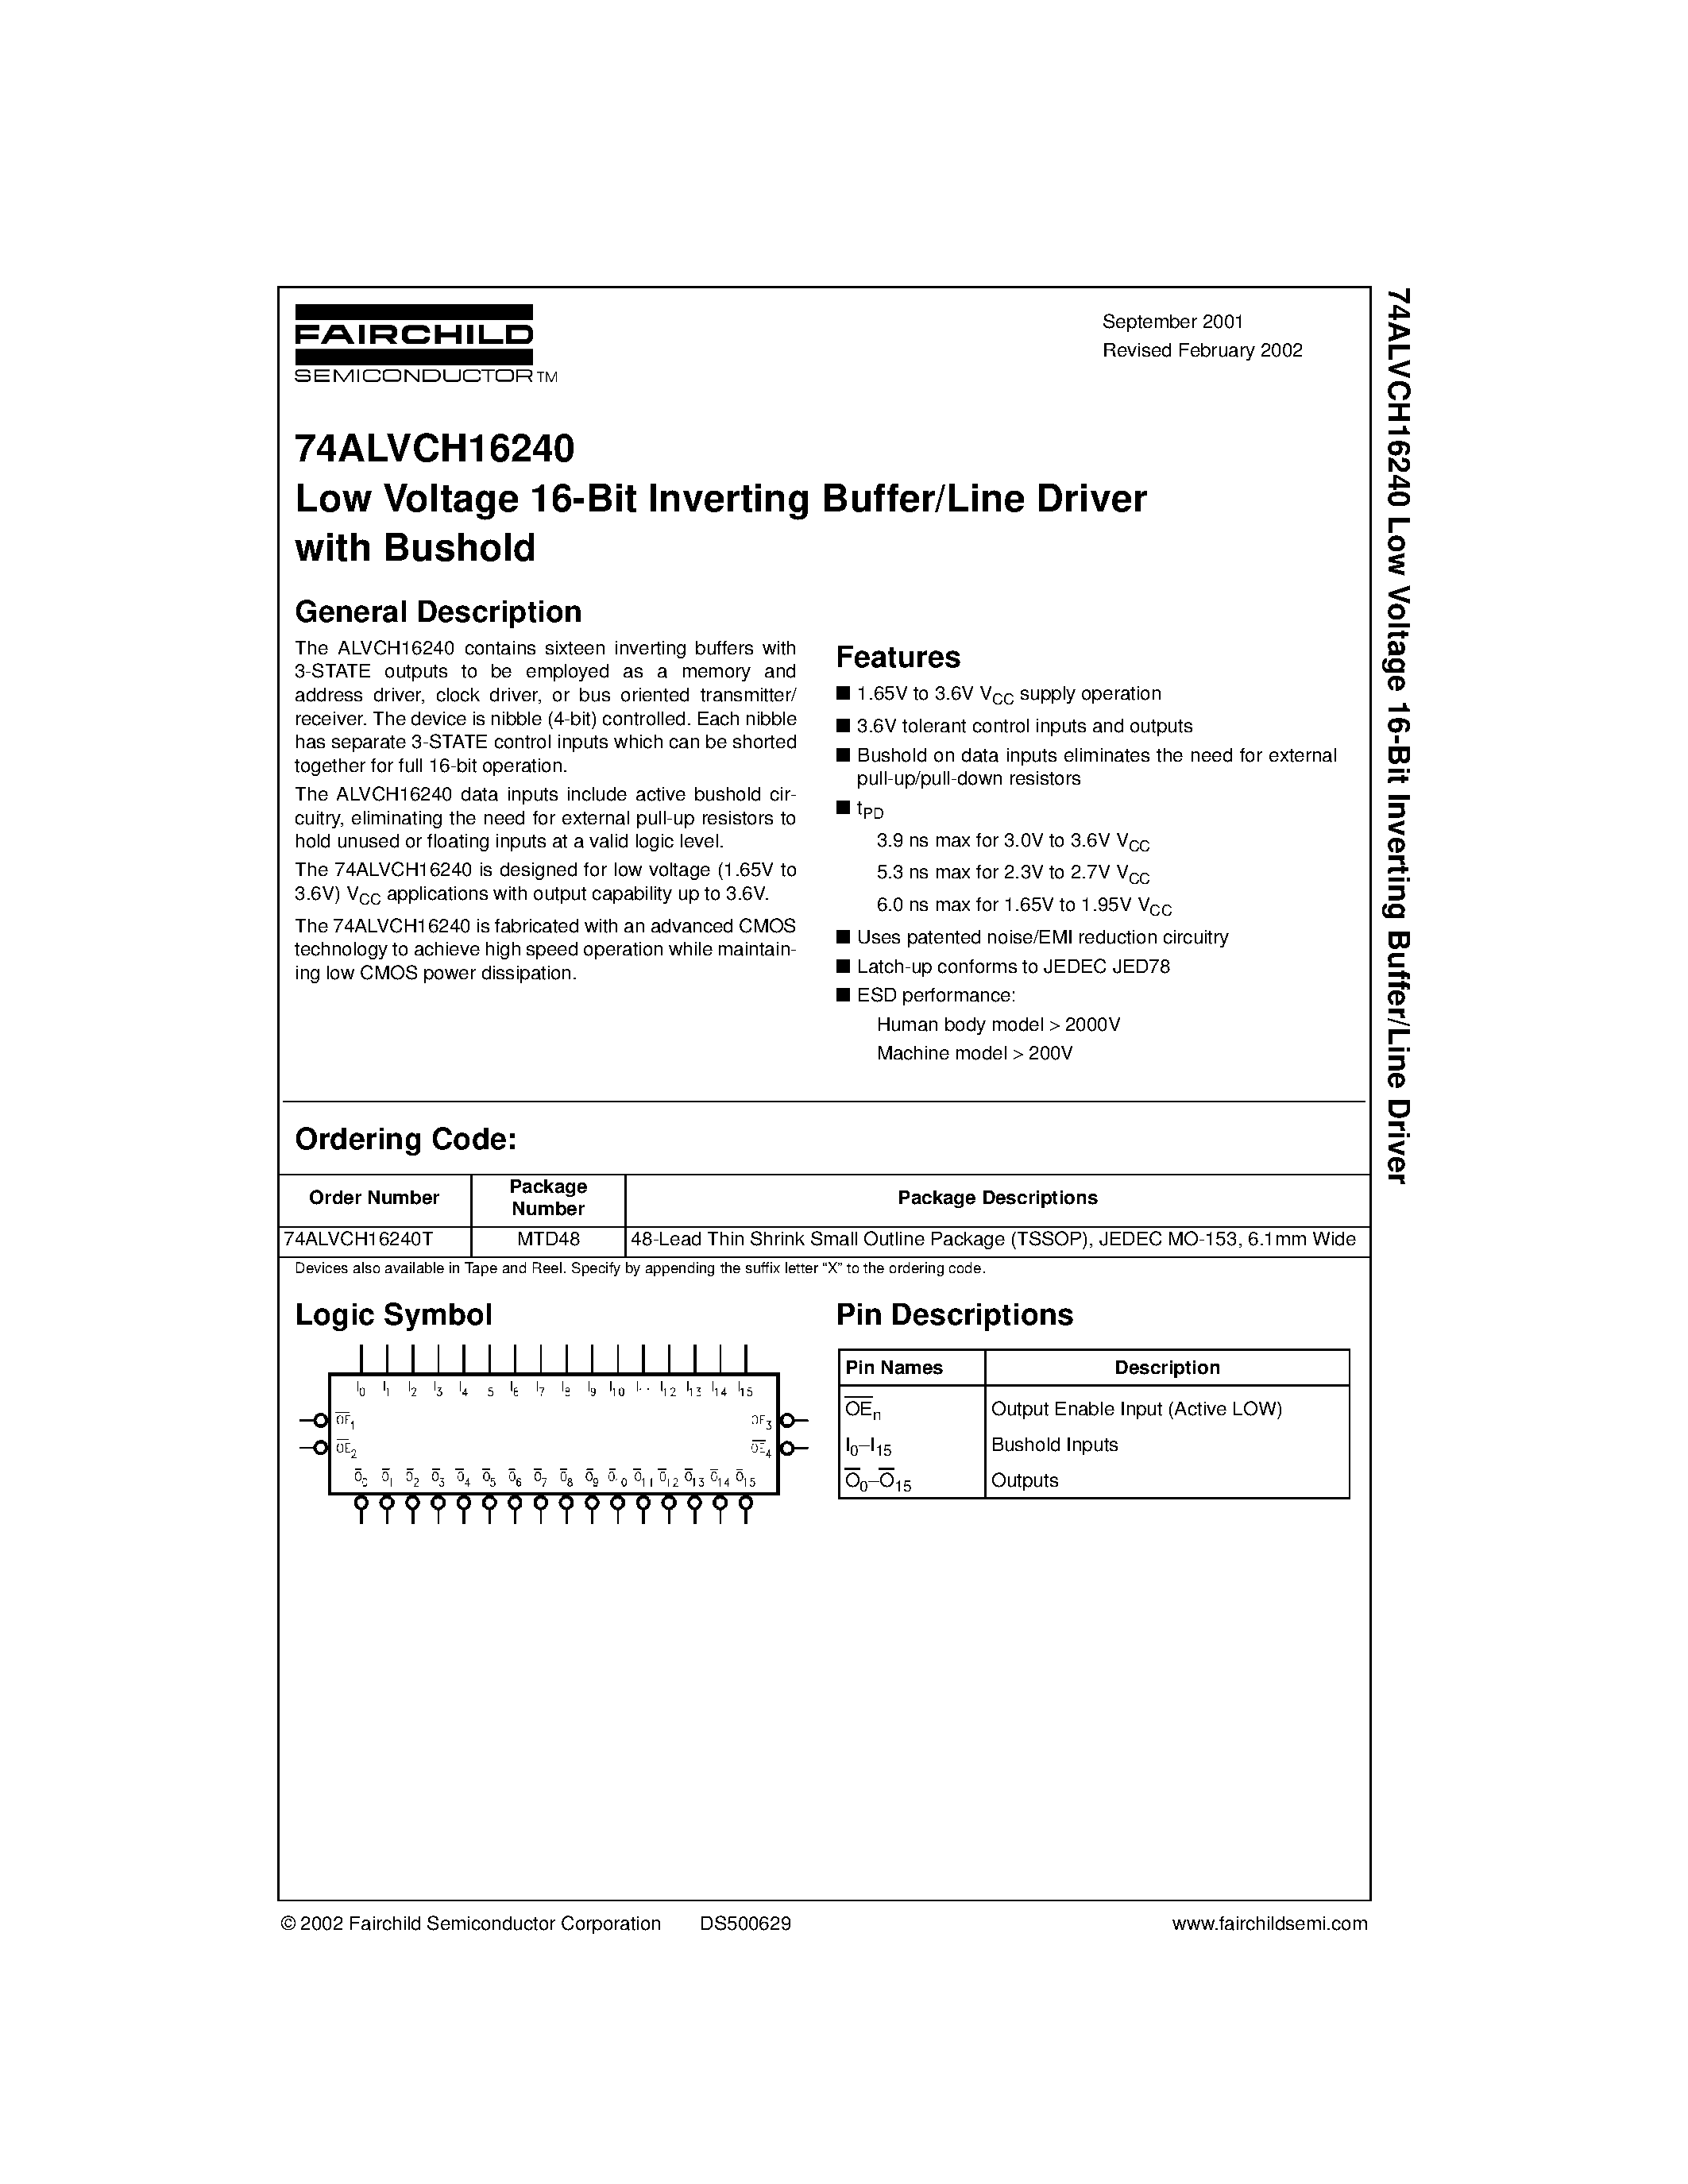 Datasheet 74ALVCH16240 - Low Voltage 16-Bit Inverting Buffer/Line Driver with Bushold page 1